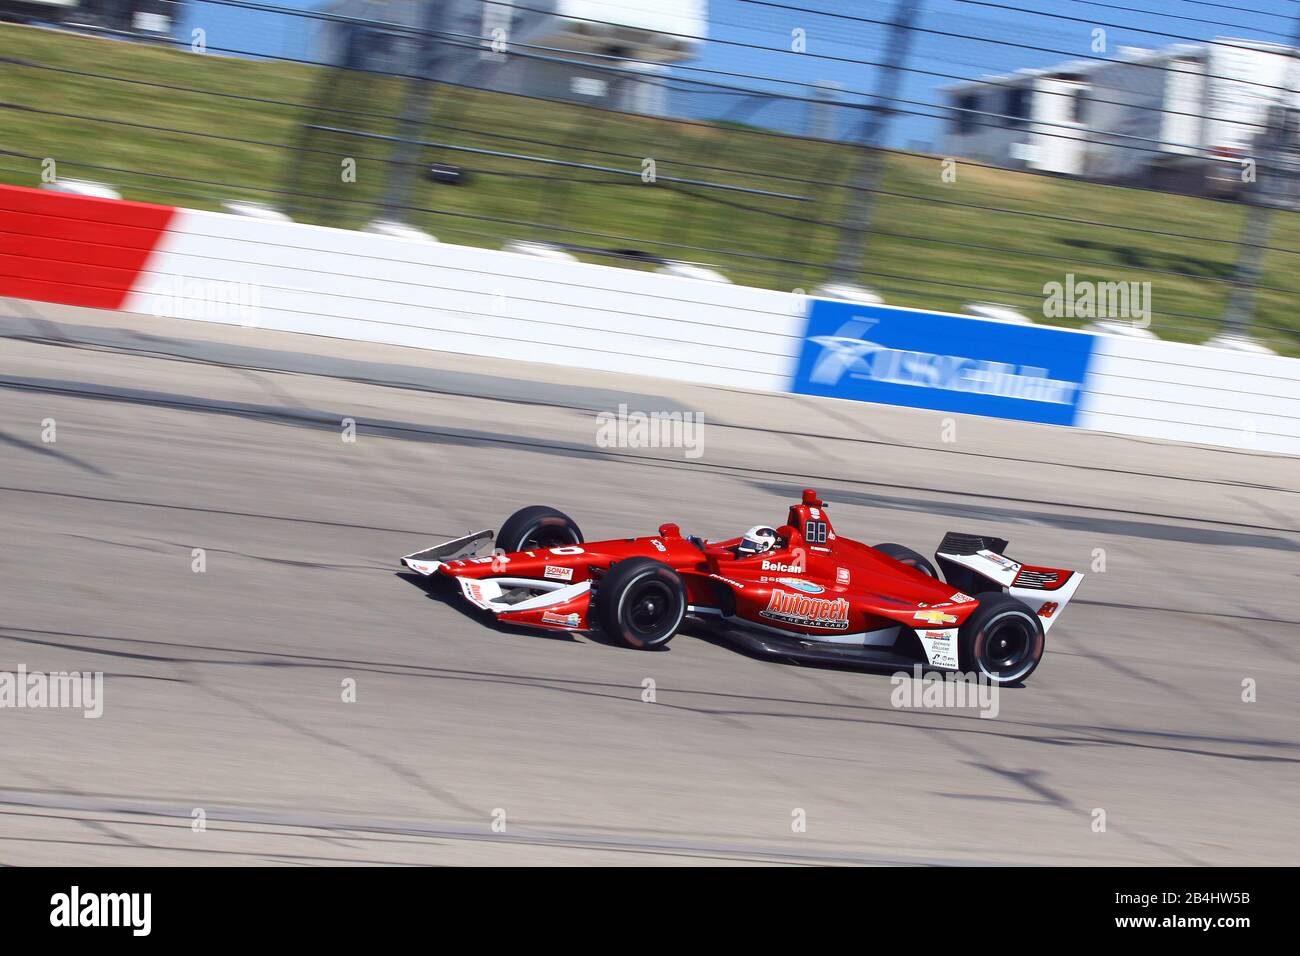 Newton Iowa, July 19, 2019: Ed Carpenter on race track during practice session for the Iowa 300 Indycar race. Stock Photo